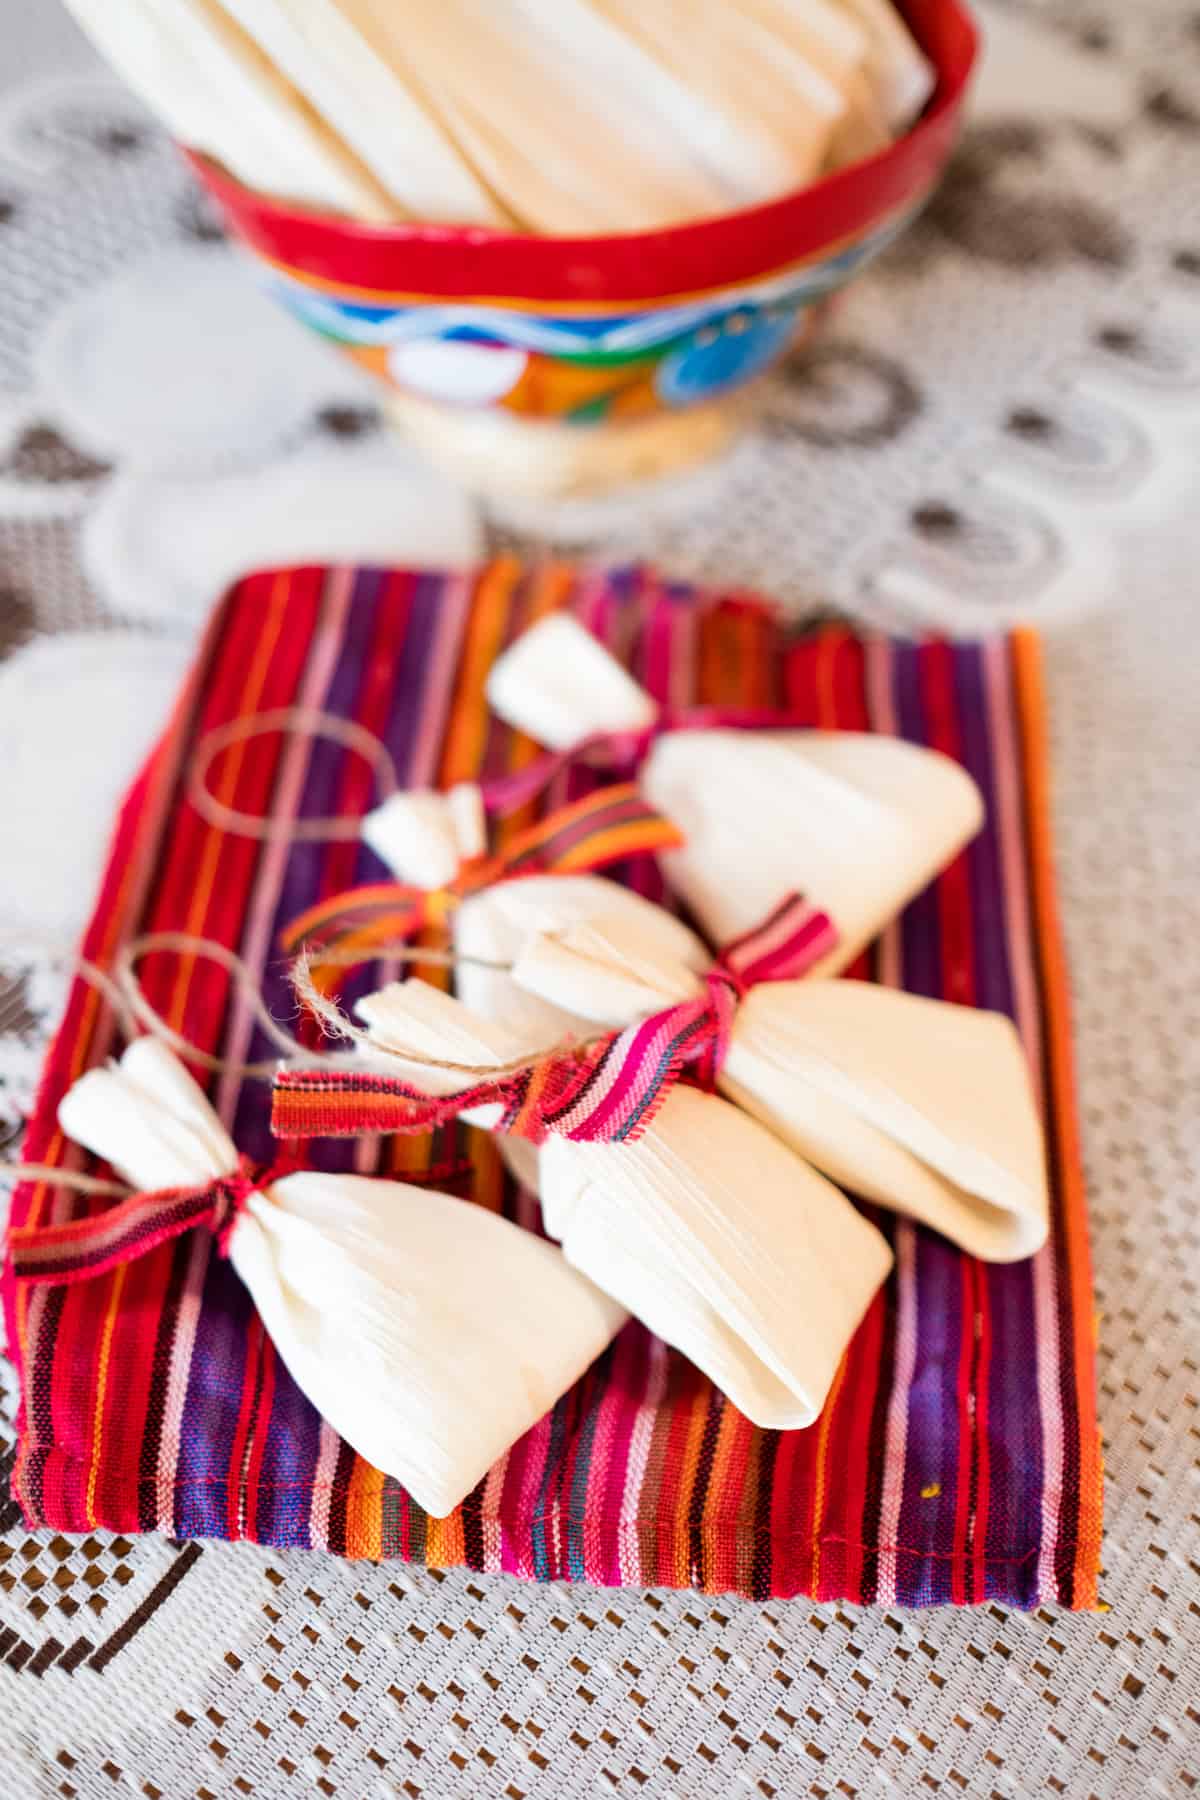 5 mini tamale shaped homemade ornaments on a piece of brightly colored fabric with bits of twine attached for hanging from the tree.